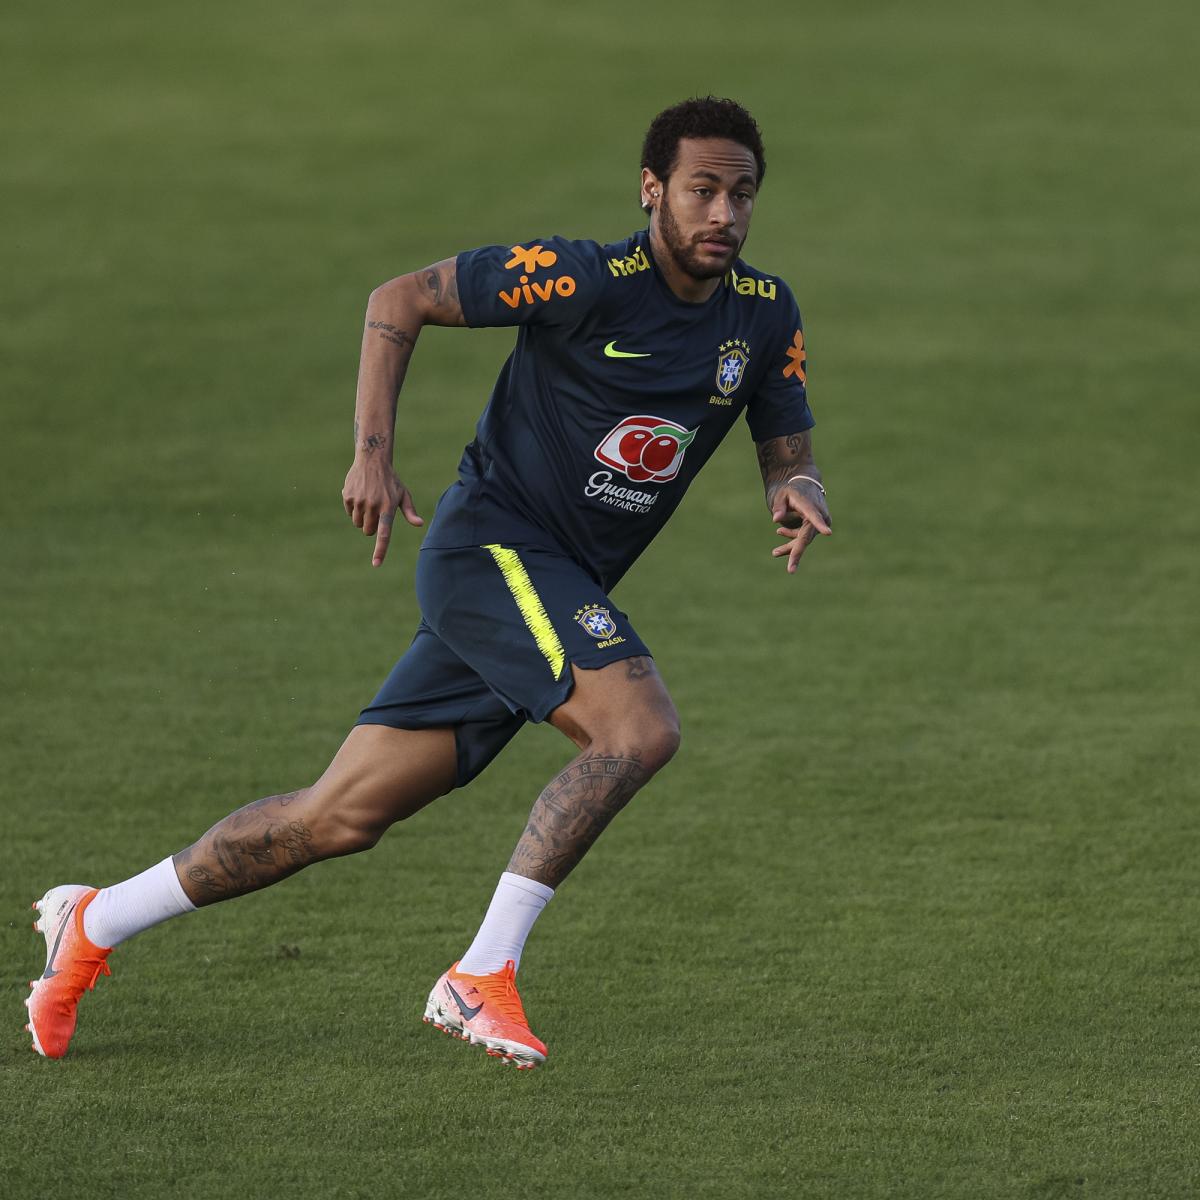 Ful Xxx Video Rape - Brazil Police Looking into Neymar's Instagram Video Response to Rape  Allegations | News, Scores, Highlights, Stats, and Rumors | Bleacher Report